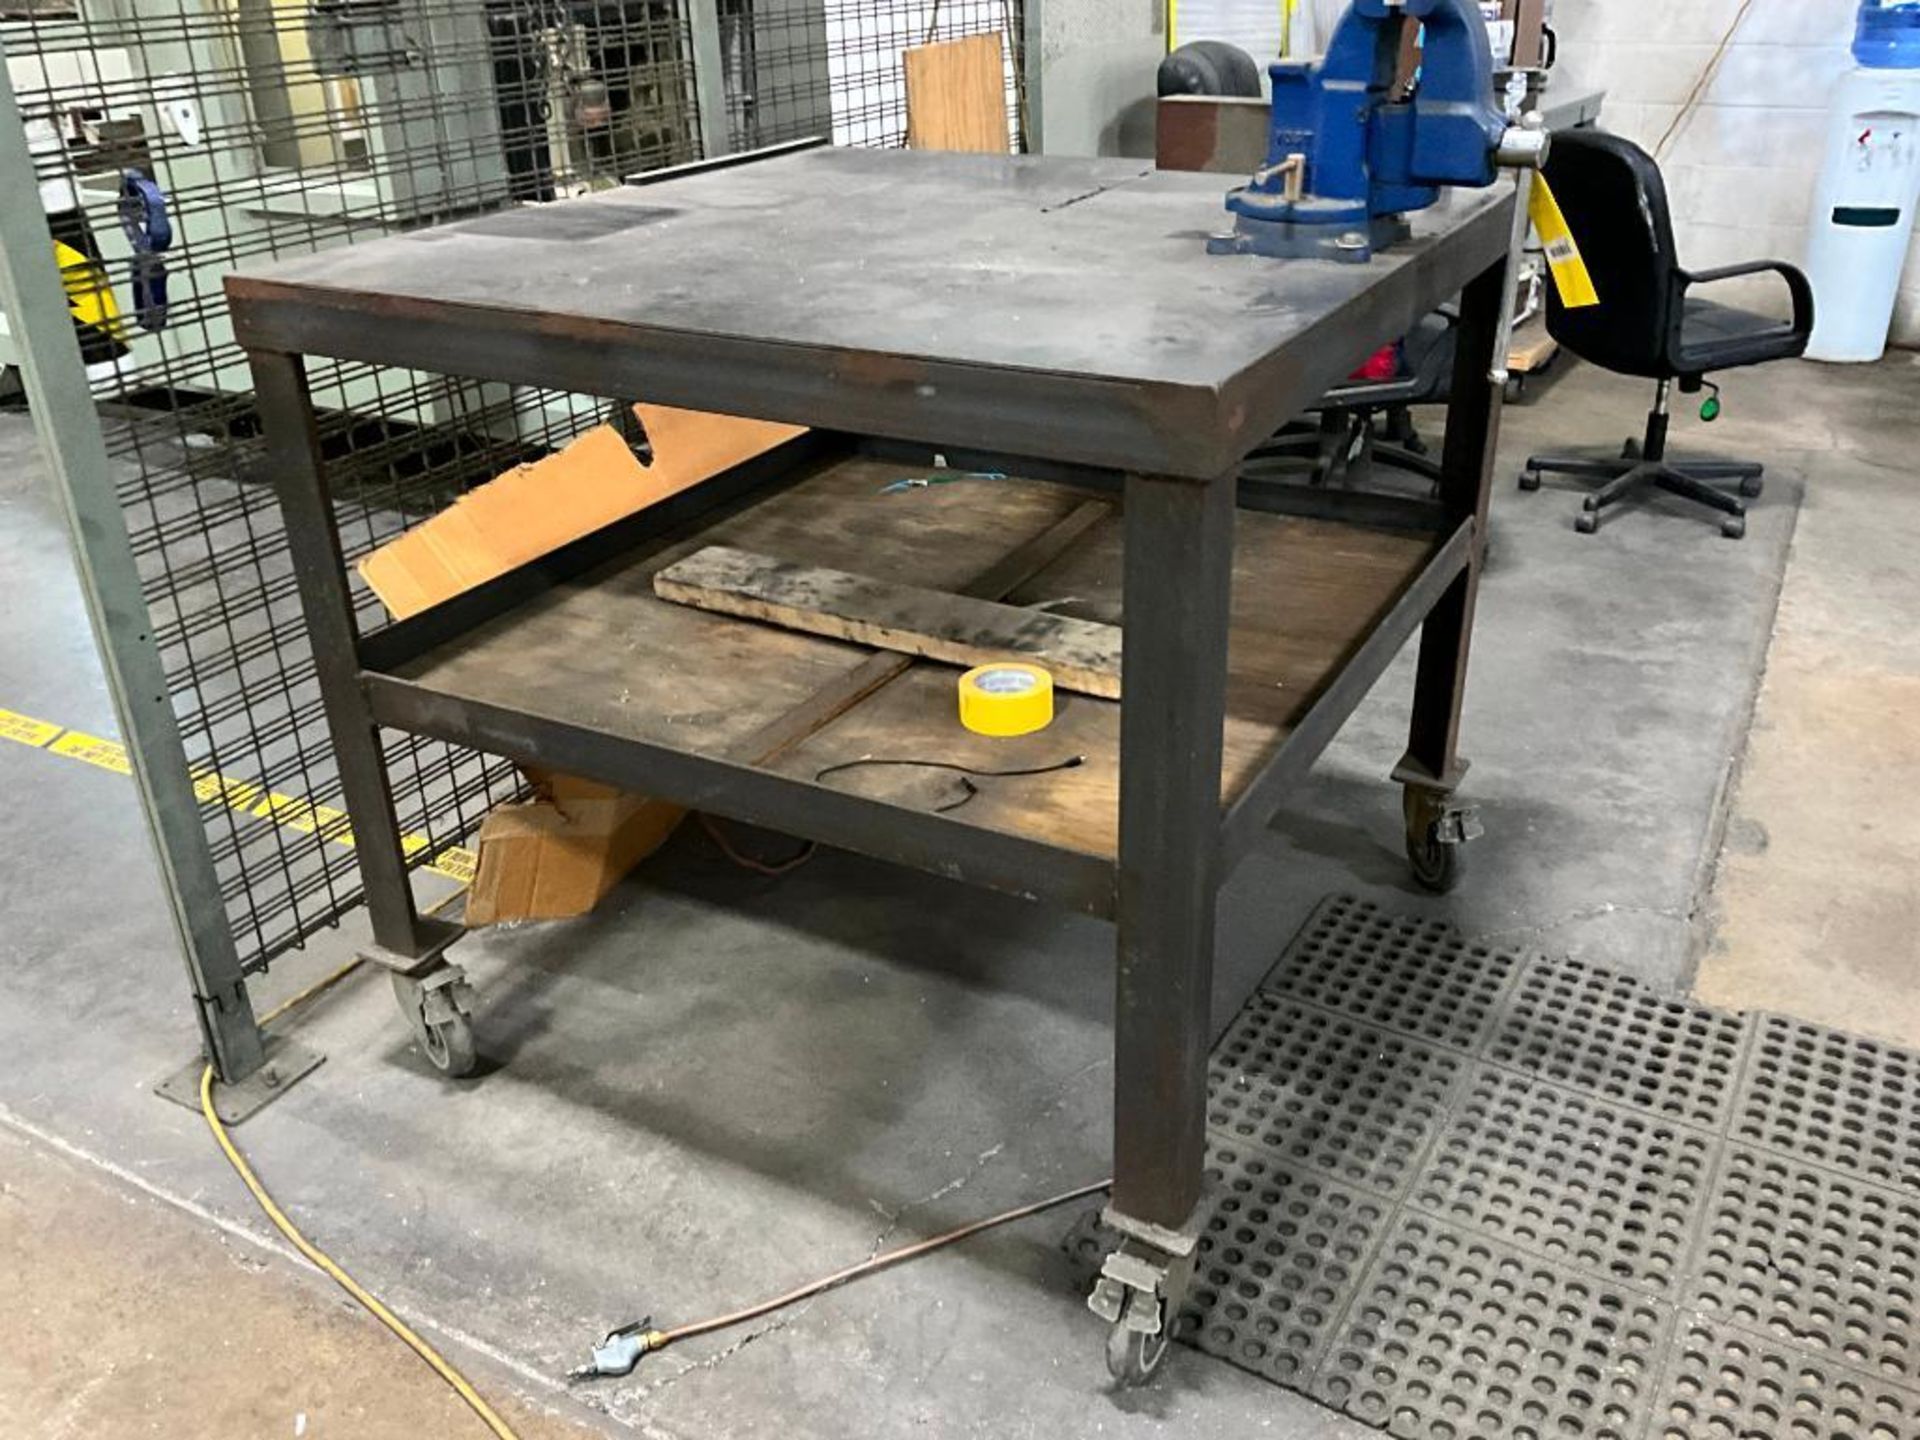 Steel Bench on Casters, 45" H x 48" W x 48" D, Yost Vice, Tool Changer - Image 2 of 8